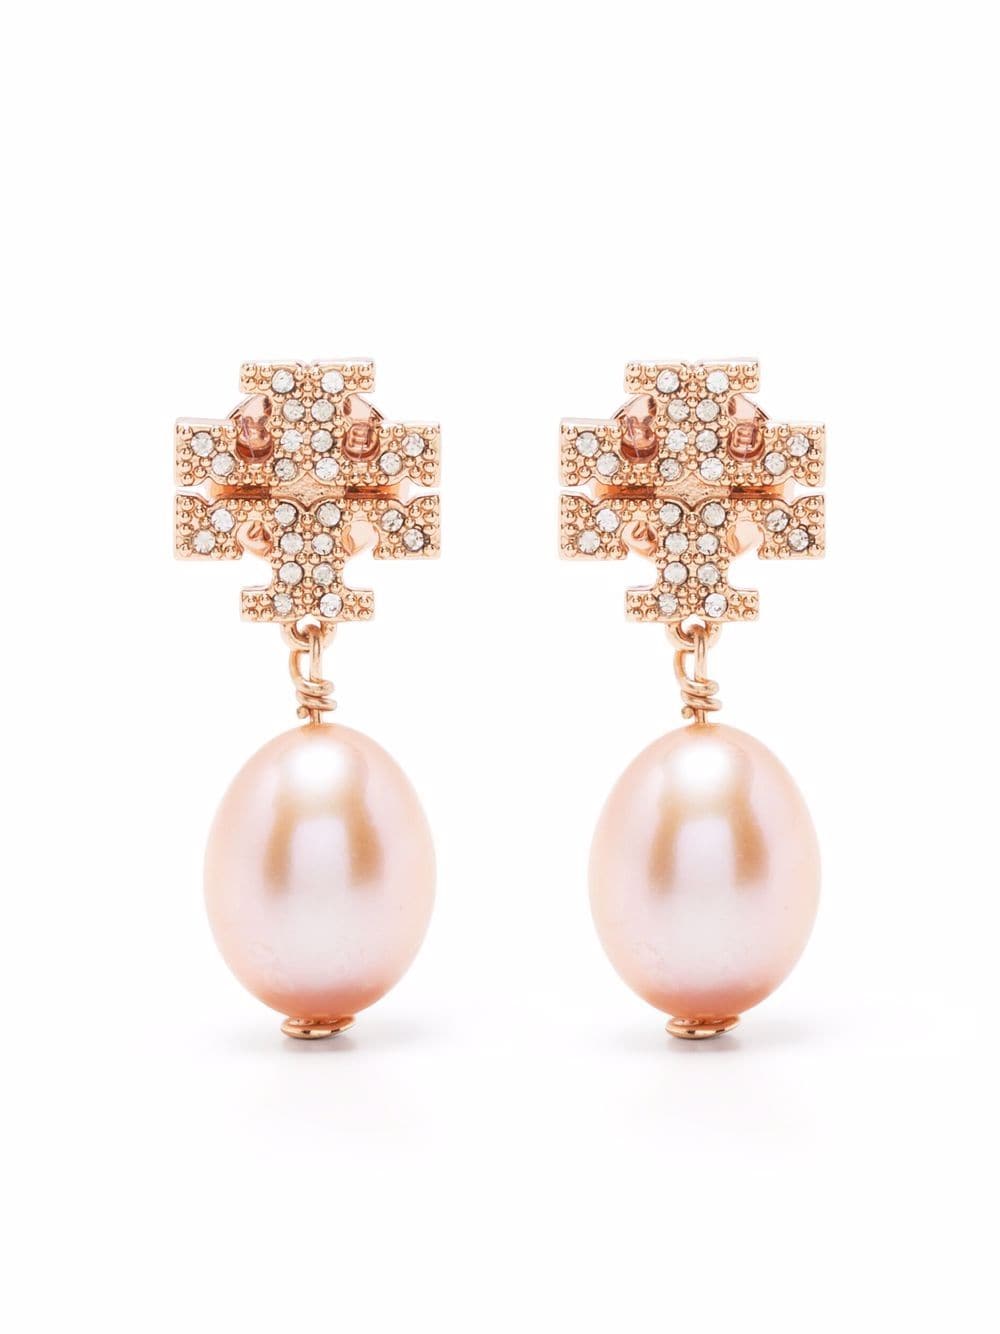 Tory Burch mother of pearl drop earrings - Gold von Tory Burch